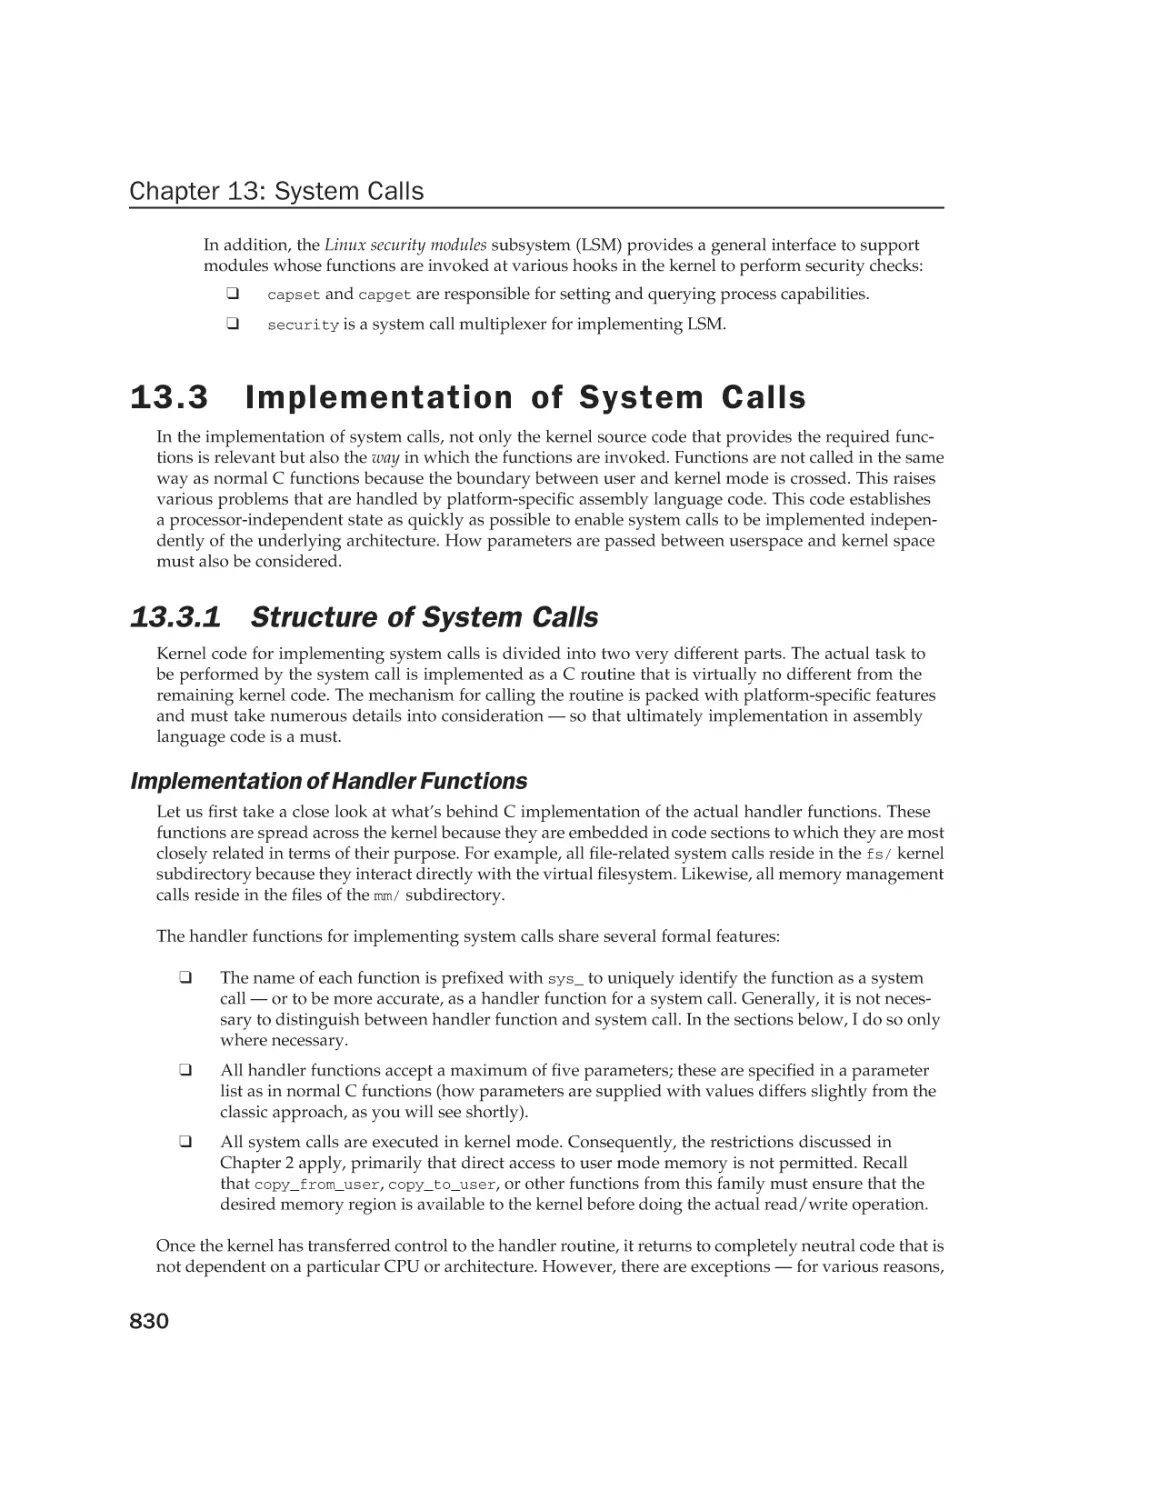 13.3 Implementation of System Calls